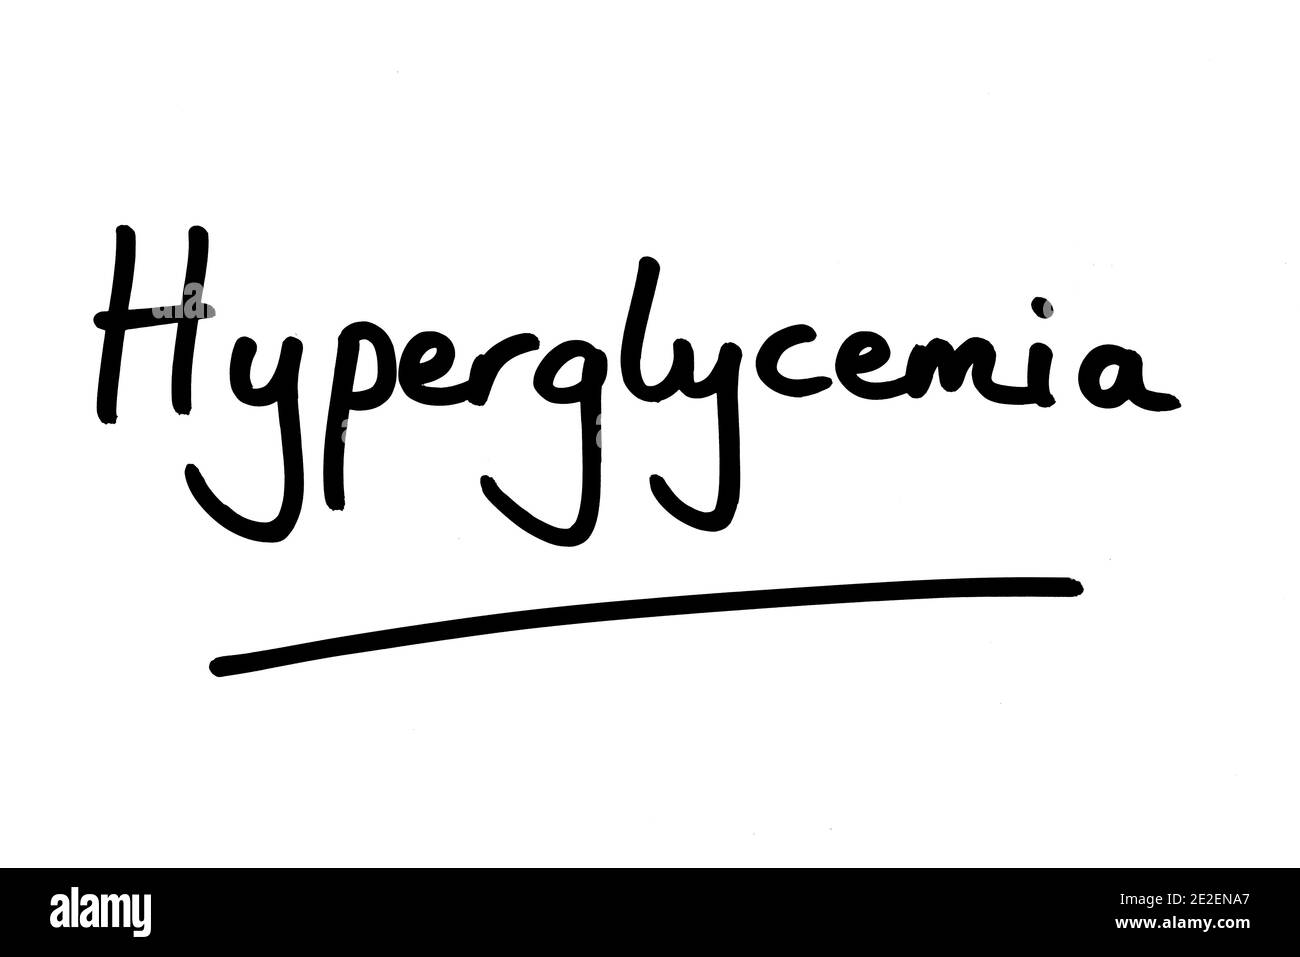 The word Hyperglycemia, handwritten on a white background. Stock Photo